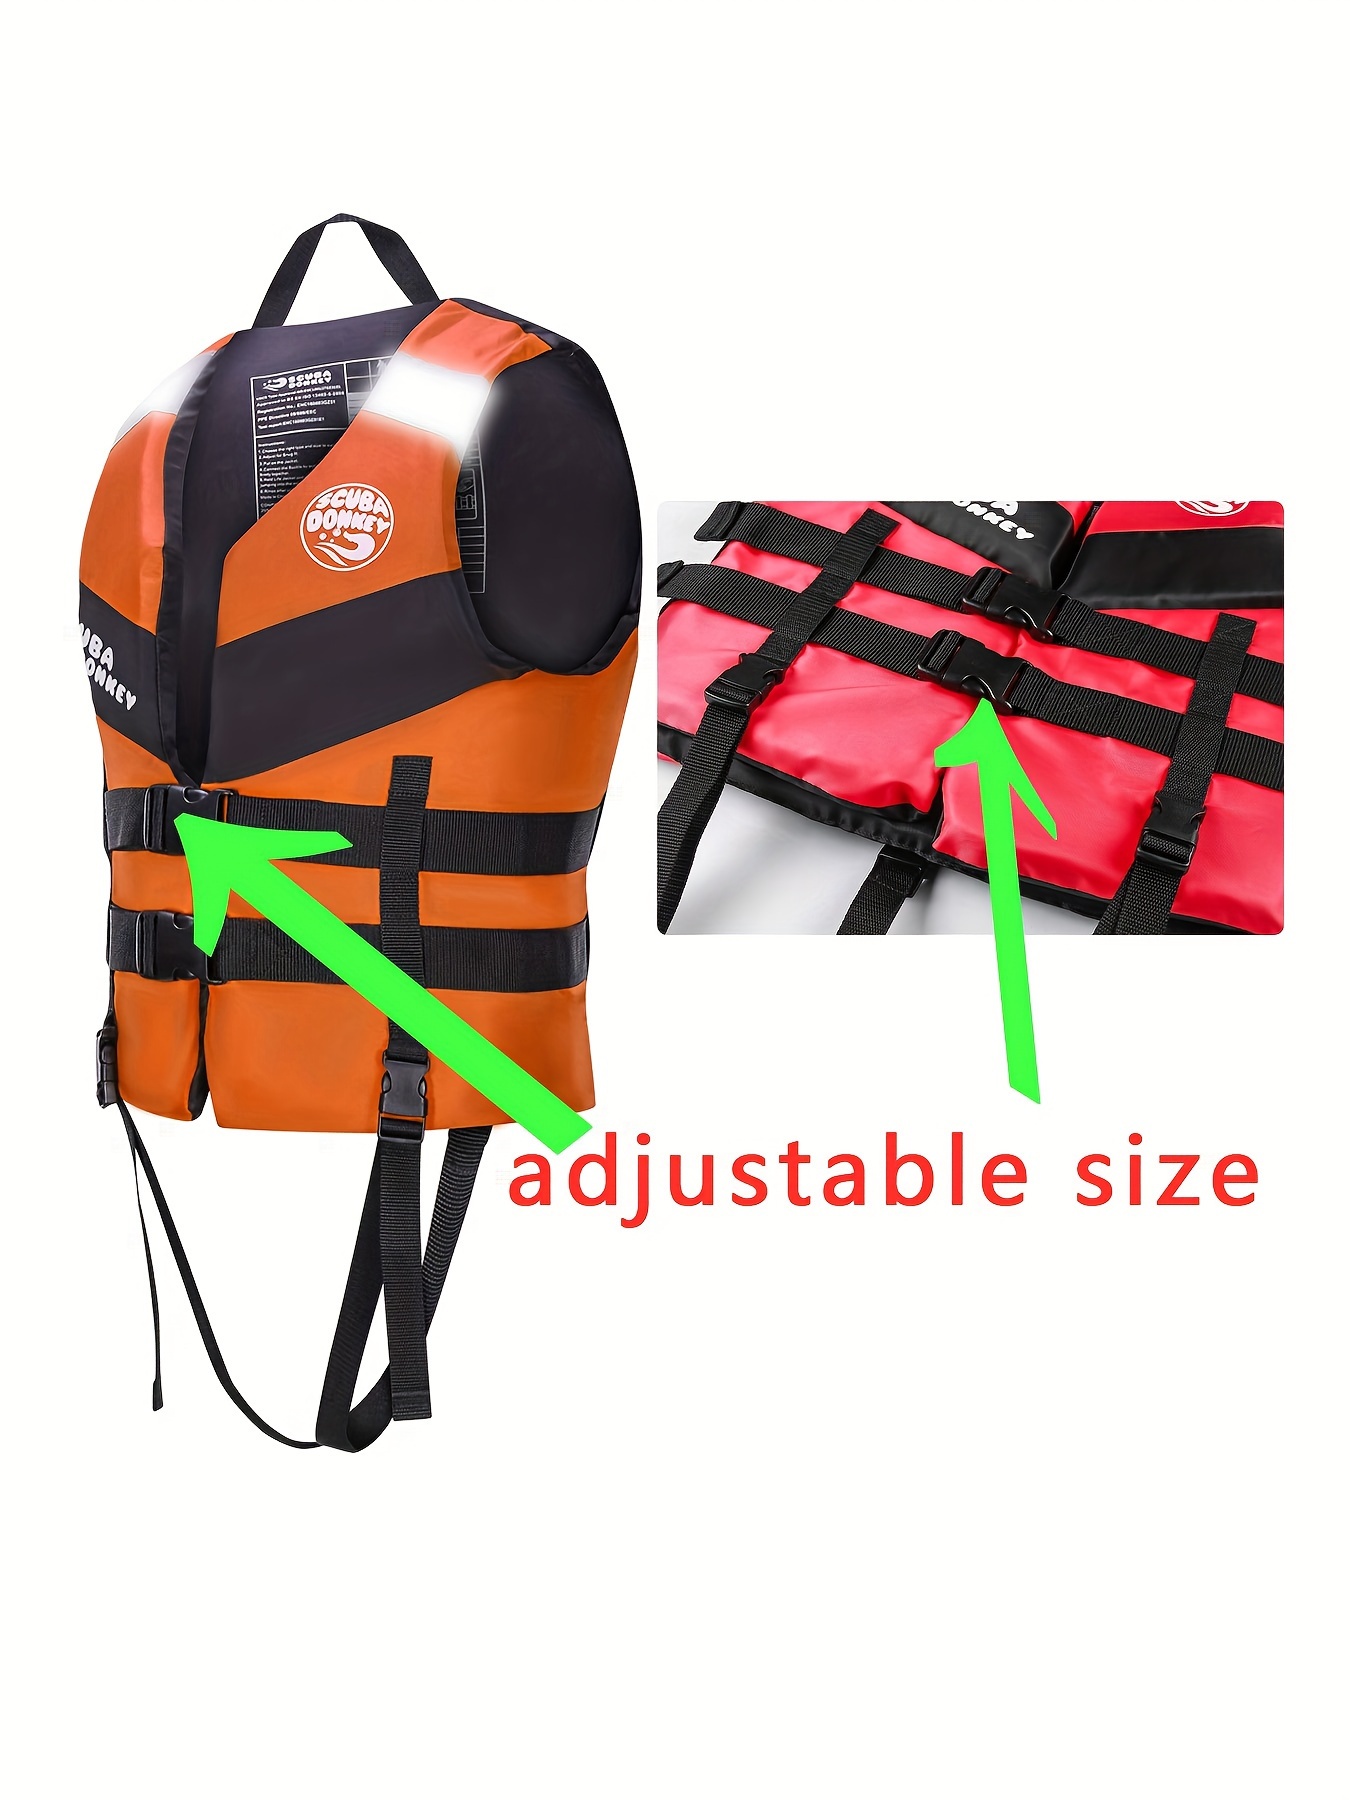  Fishing Vest  Adjustable Buoyancy Vest with Reflective Tape,  Floating Equipment for Hiking, Climbing, Photography, Outdoor Surfing,  Water Sports Equipment, Kacey : Sports & Outdoors